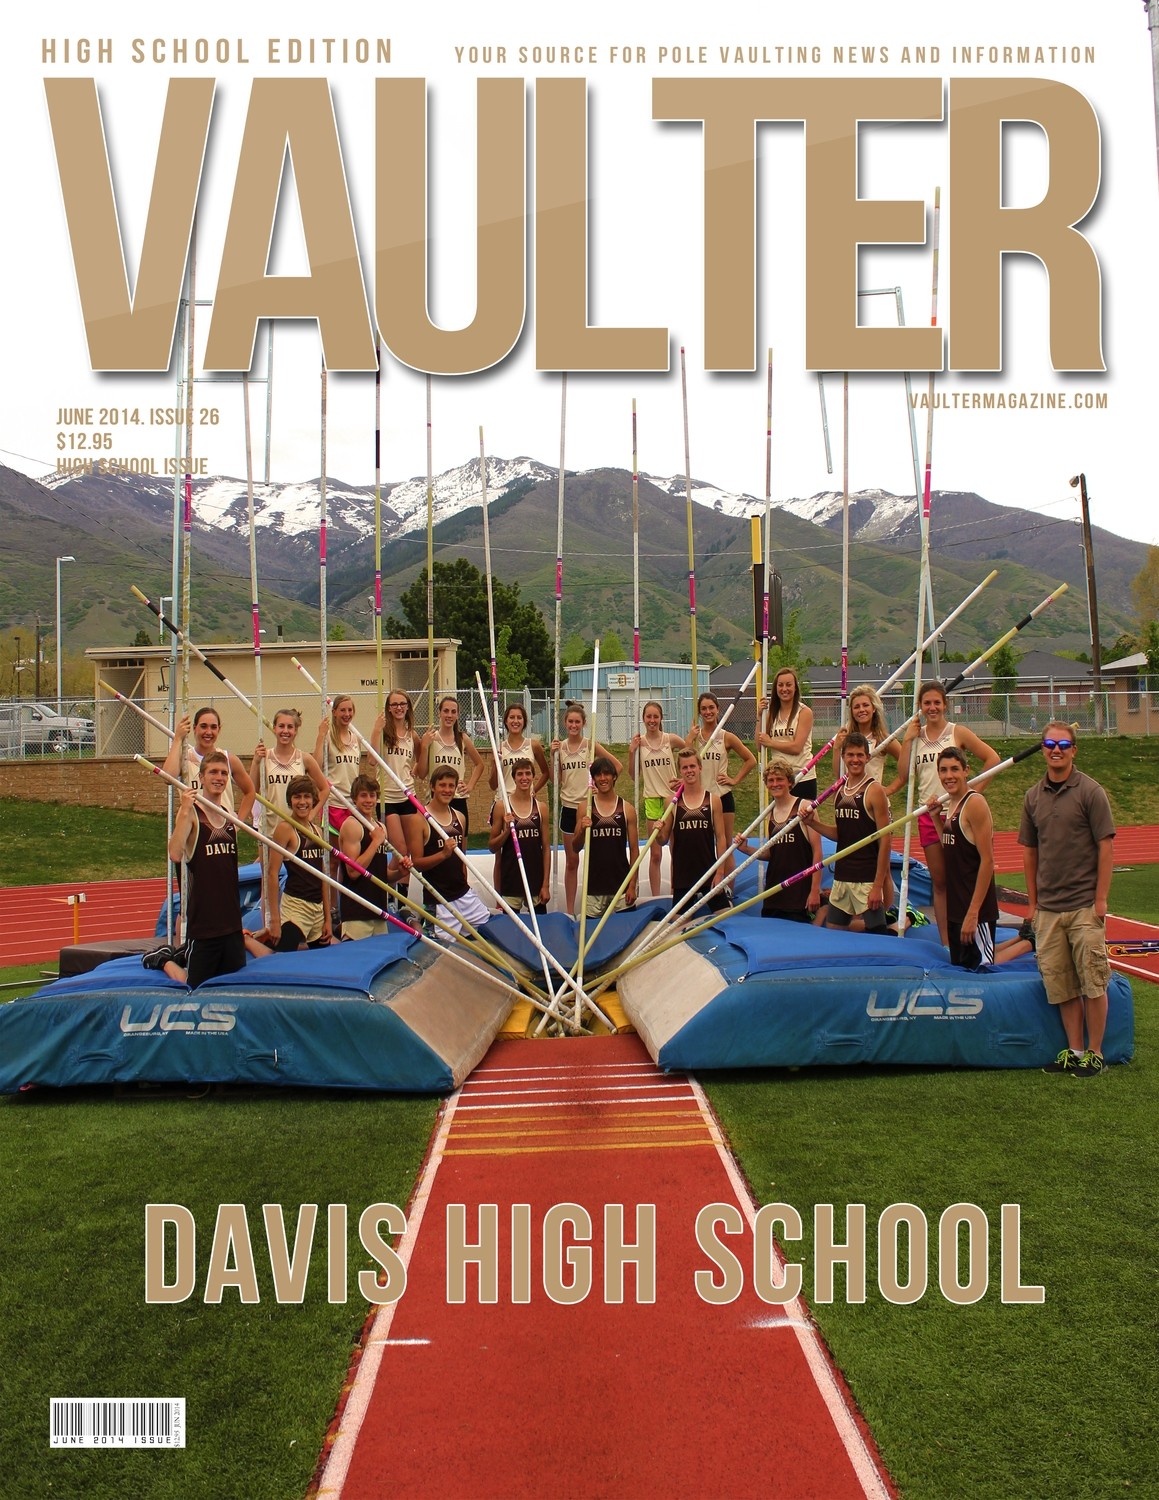 Buy the June Davis High School Magazine - Get Poster for $20 - That's $5 Off